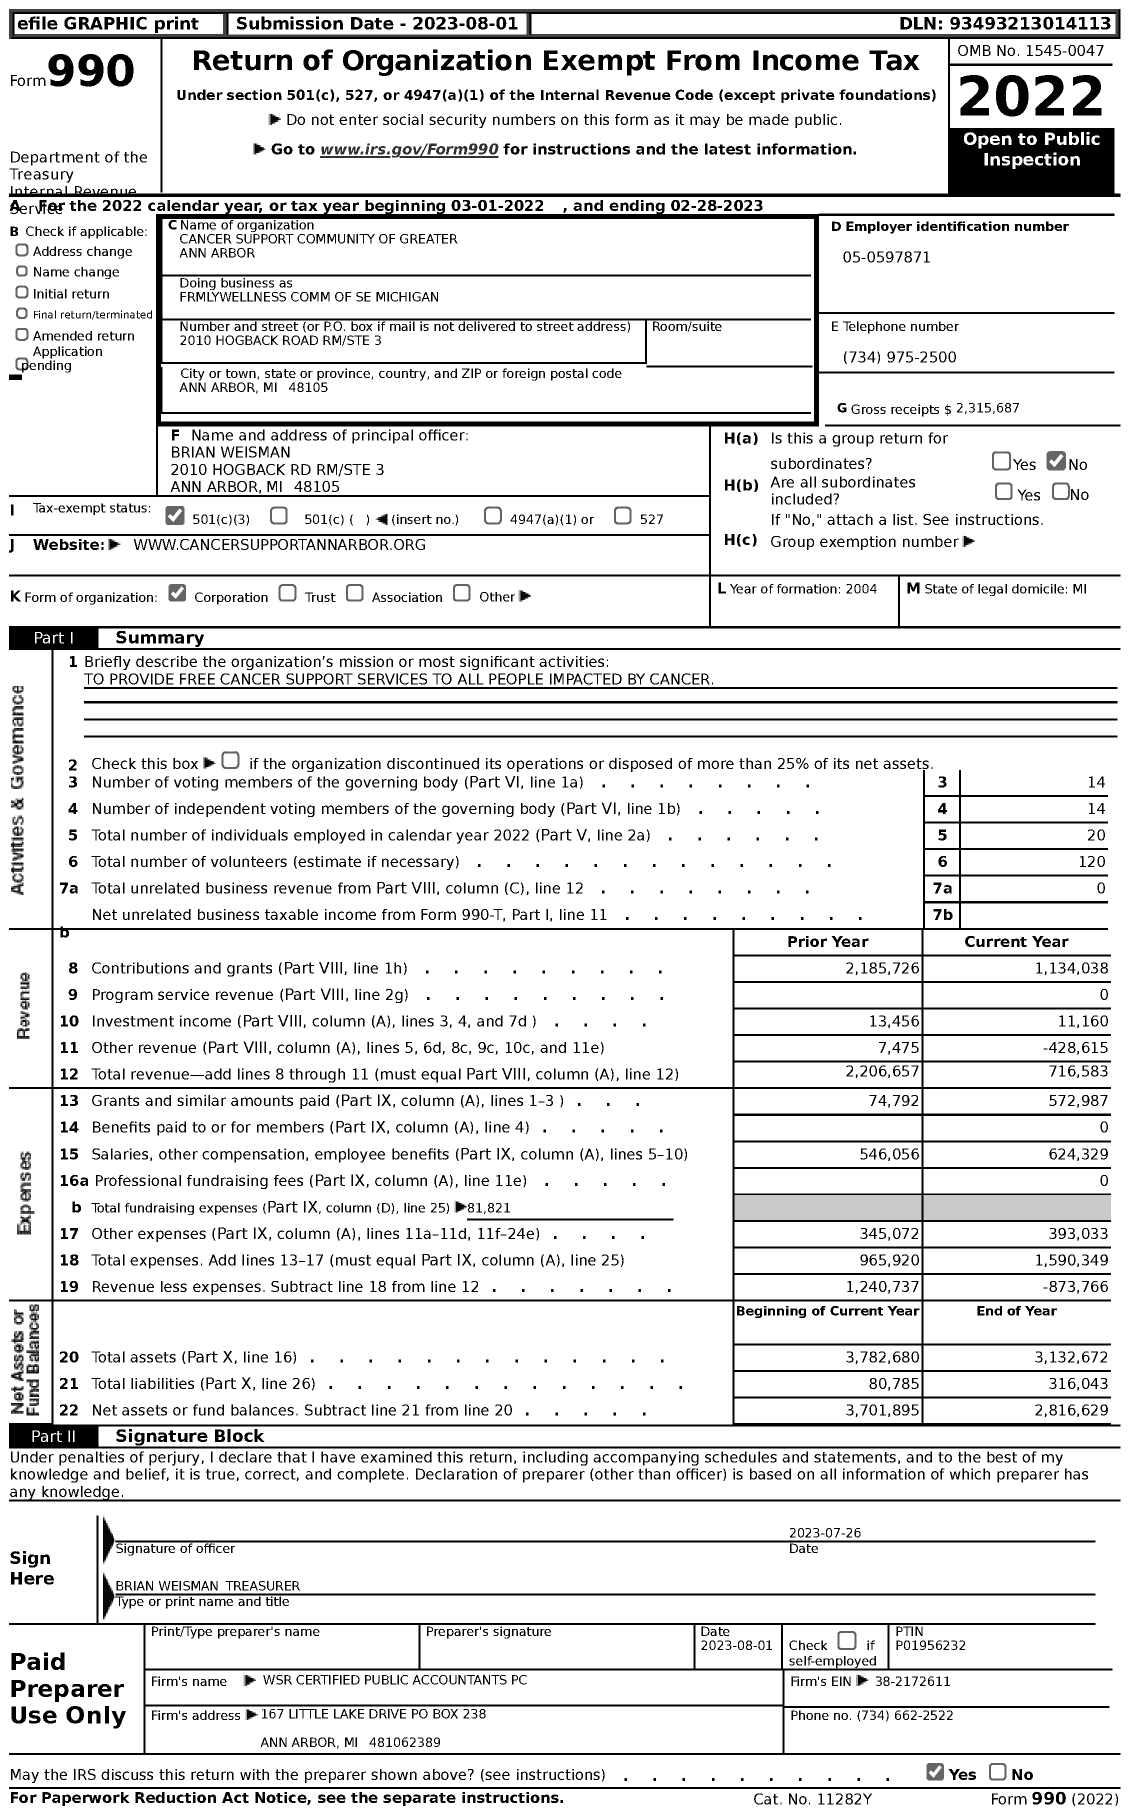 Image of first page of 2022 Form 990 for Frmlywellness Comm of Se Michigan